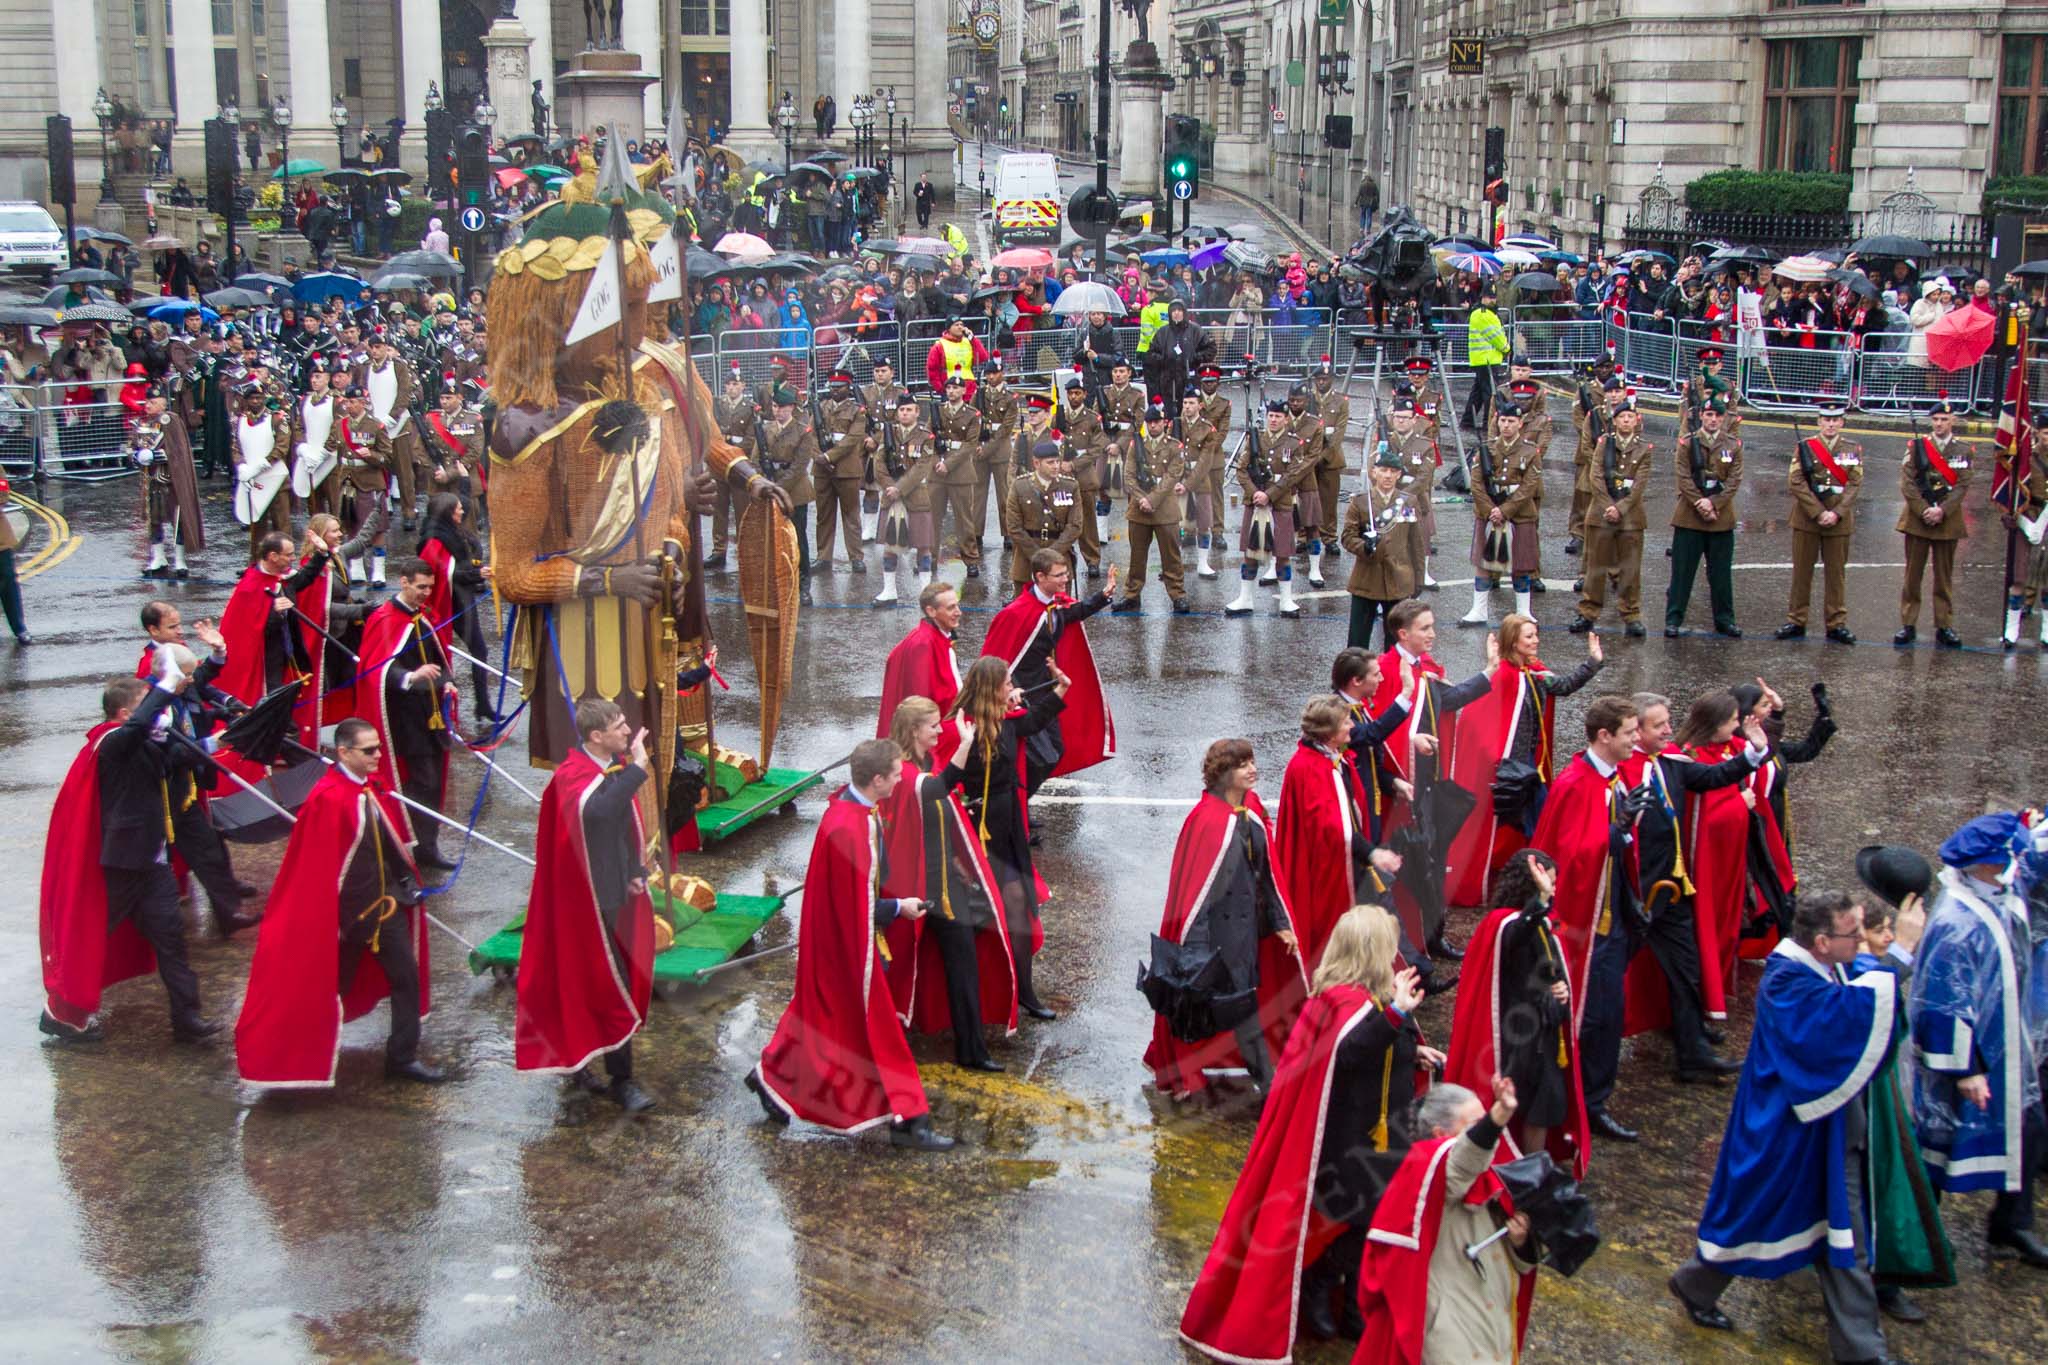 Lord Mayor's Show 2013: 7-Society of Young Freemen, escorts the figures of God and Magog, traditional guardians of London..
Press stand opposite Mansion House, City of London,
London,
Greater London,
United Kingdom,
on 09 November 2013 at 11:03, image #189